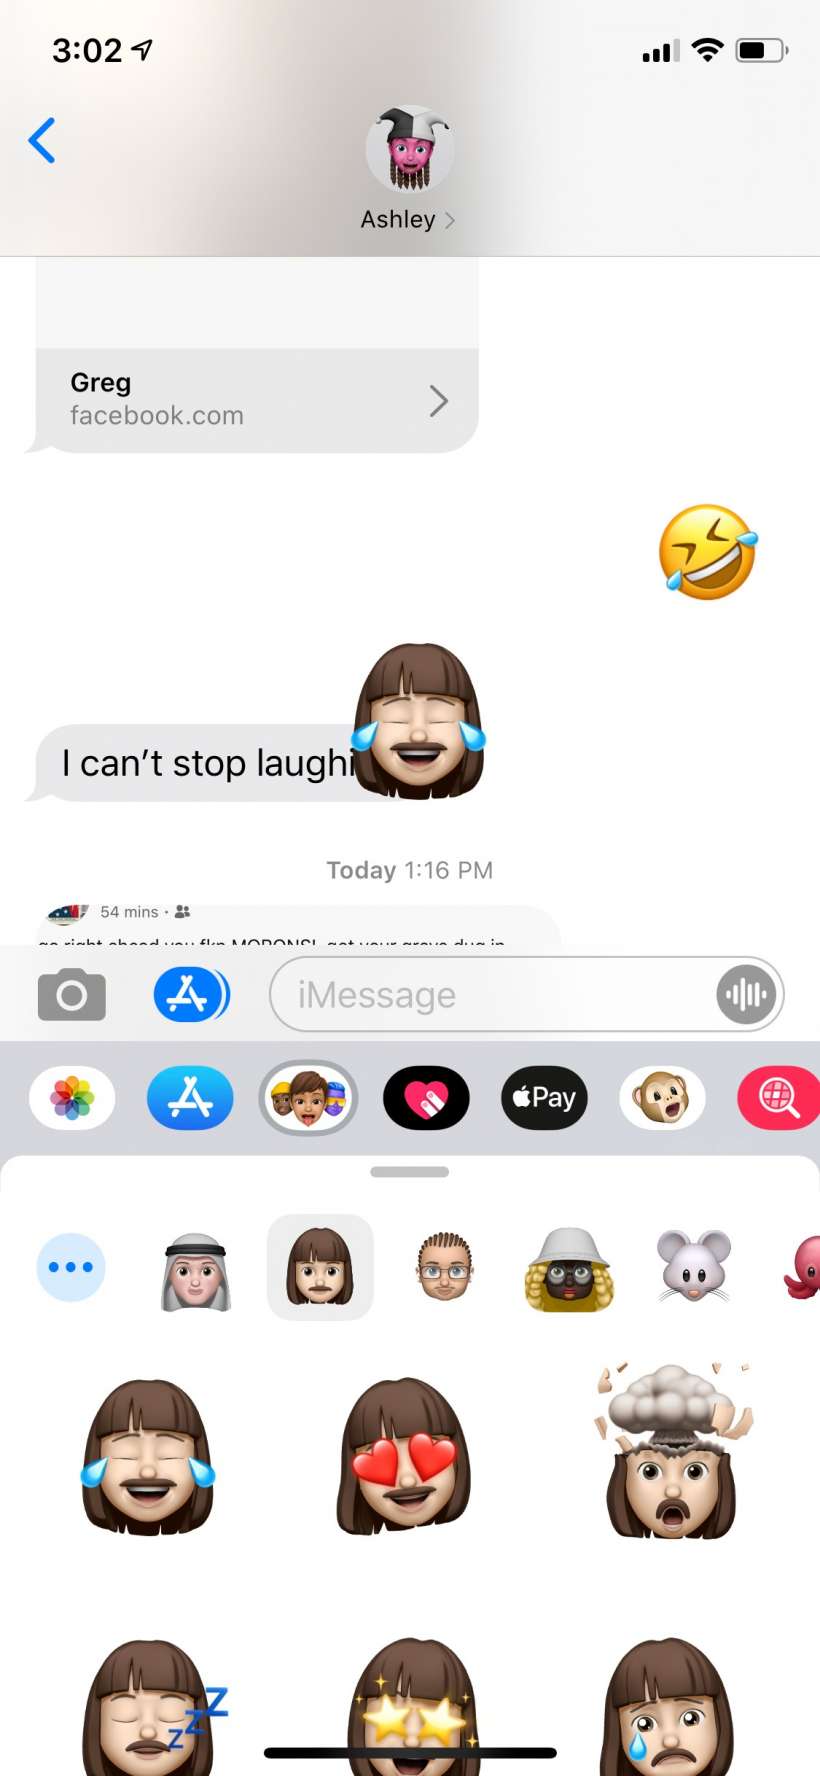 How to react to text messages with Memoji stickers on iPhone and iPad.